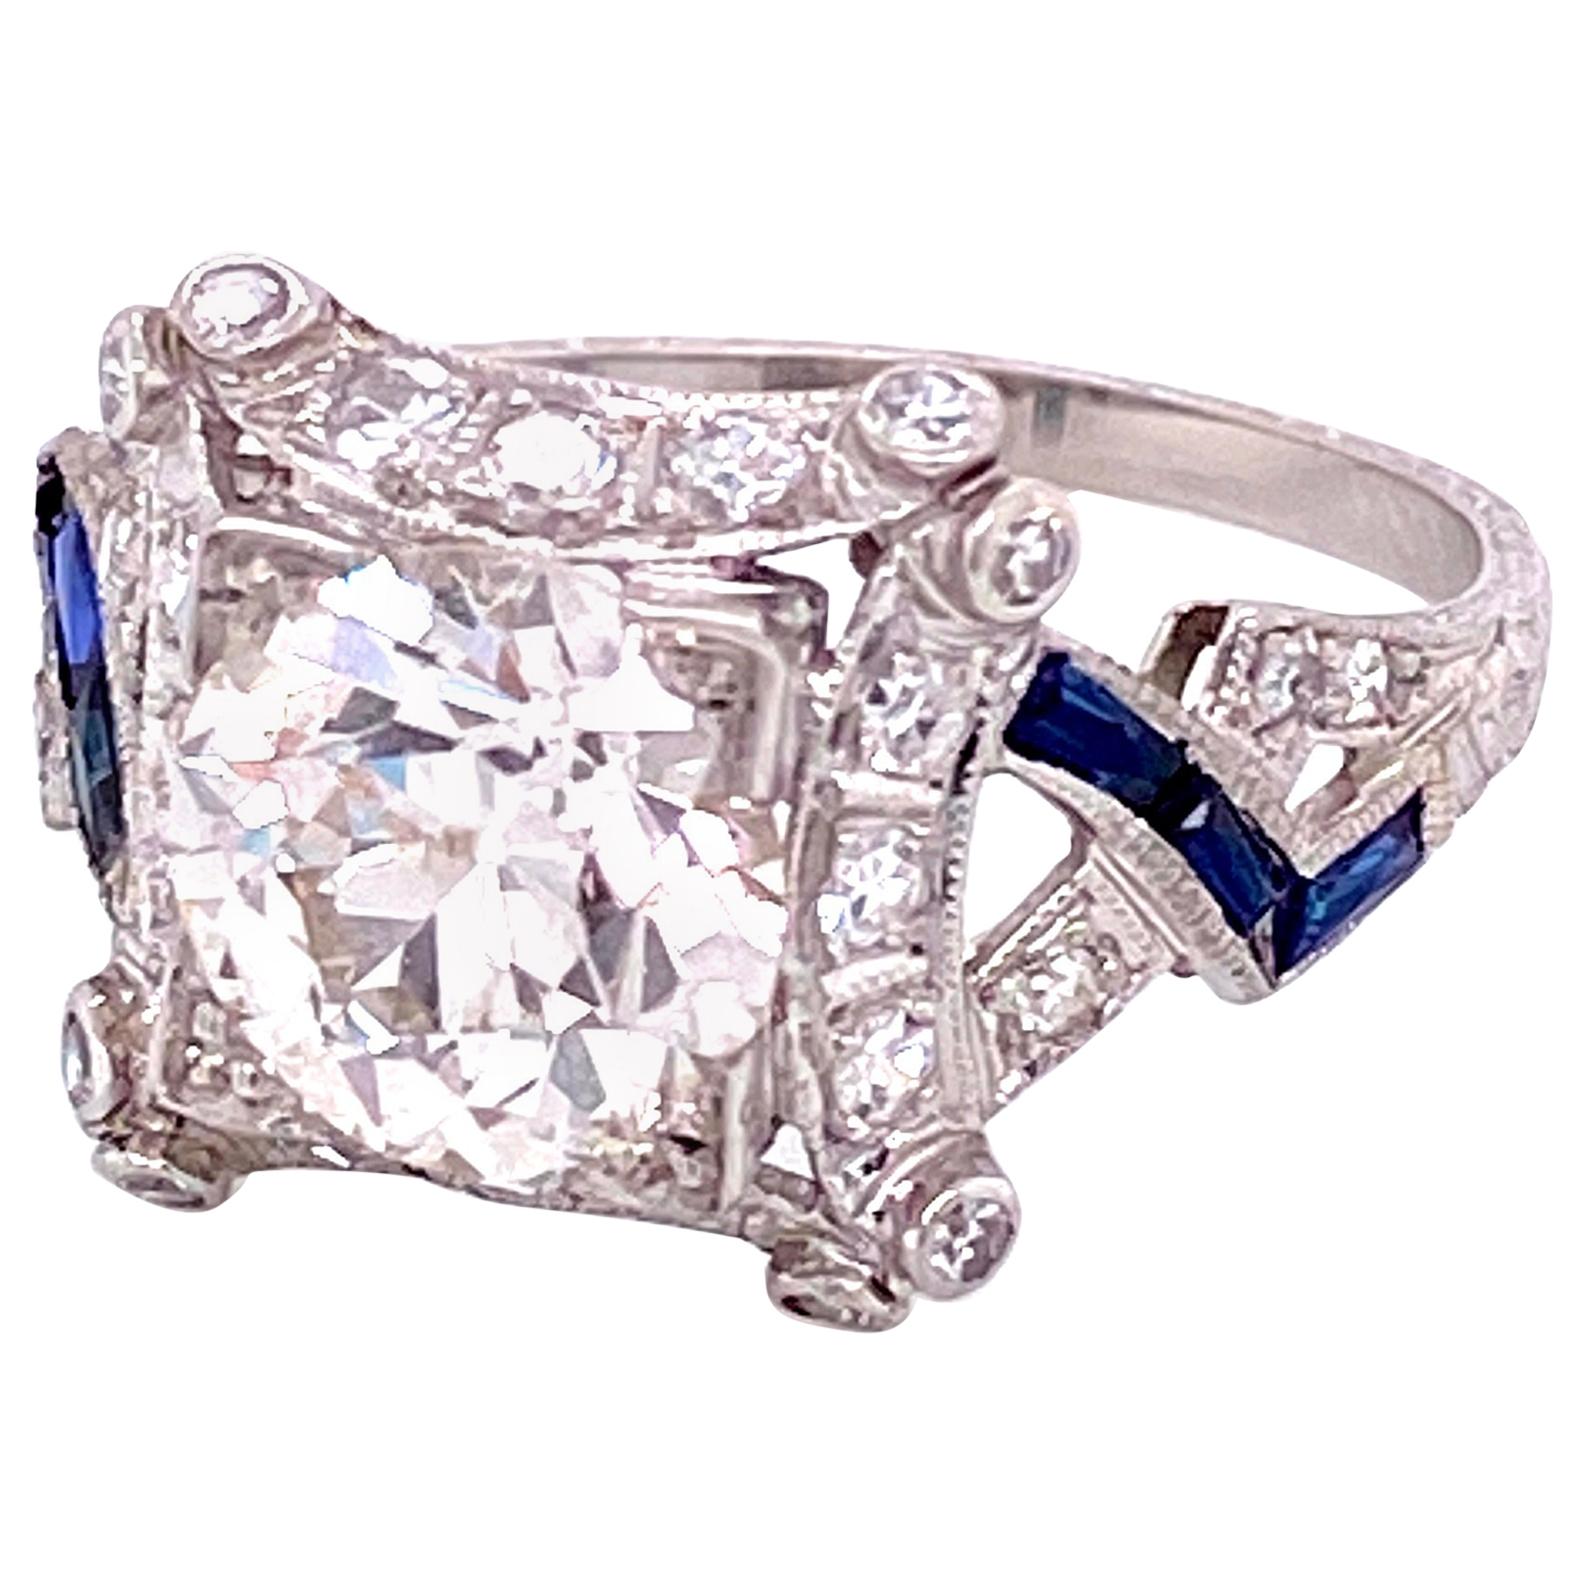 2.16 Carat Diamond and Sapphire Platinum Cocktail Ring Fine Estate Jewelry For Sale